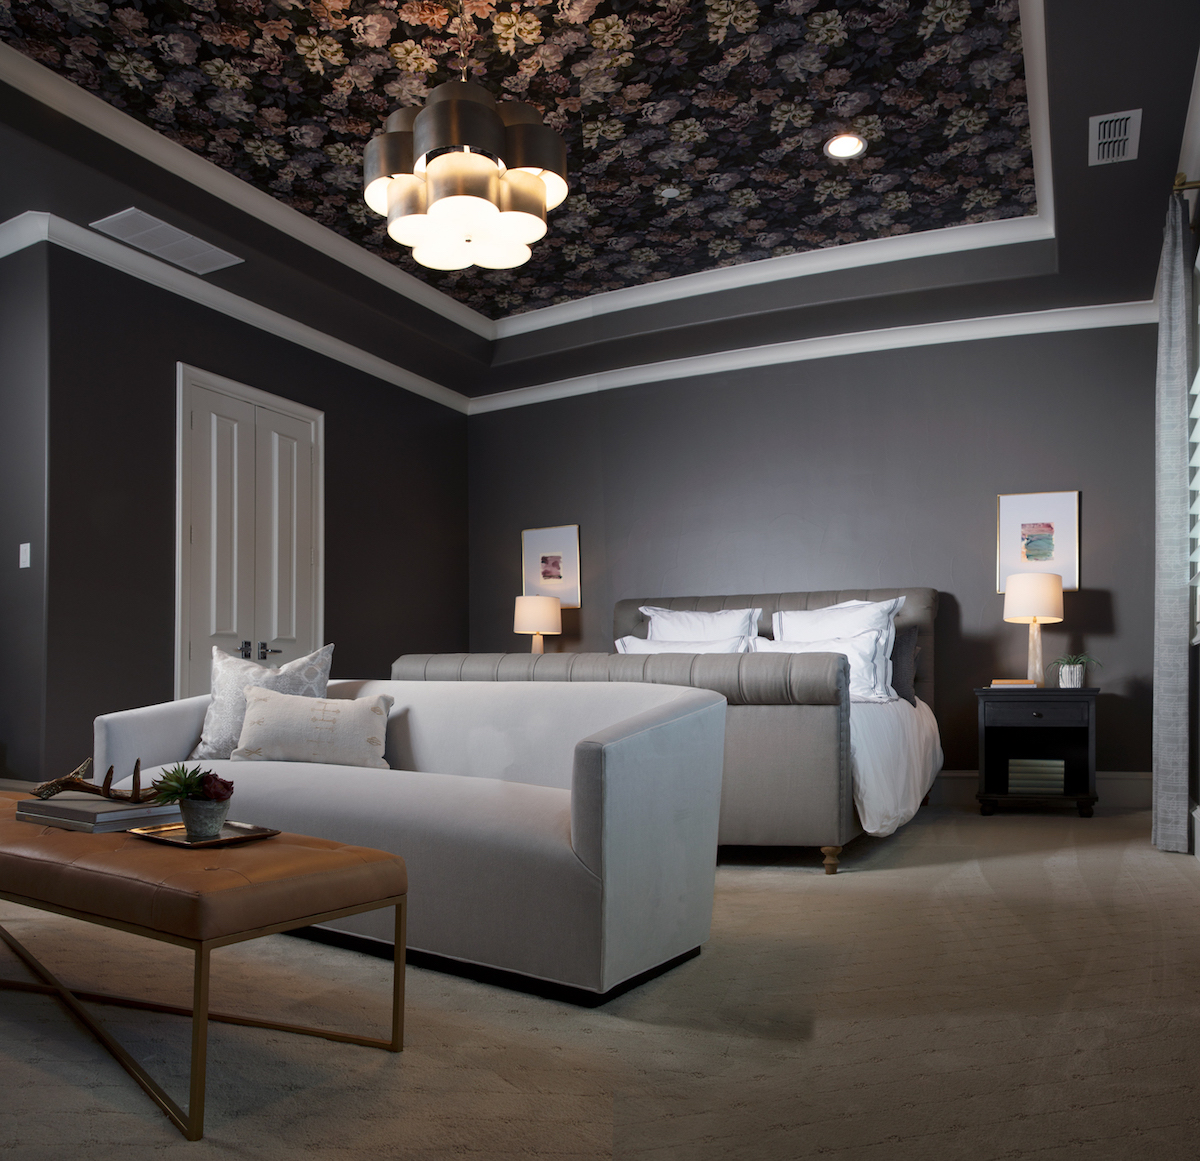 primary-bedroom-design-wallpapered-ceiling